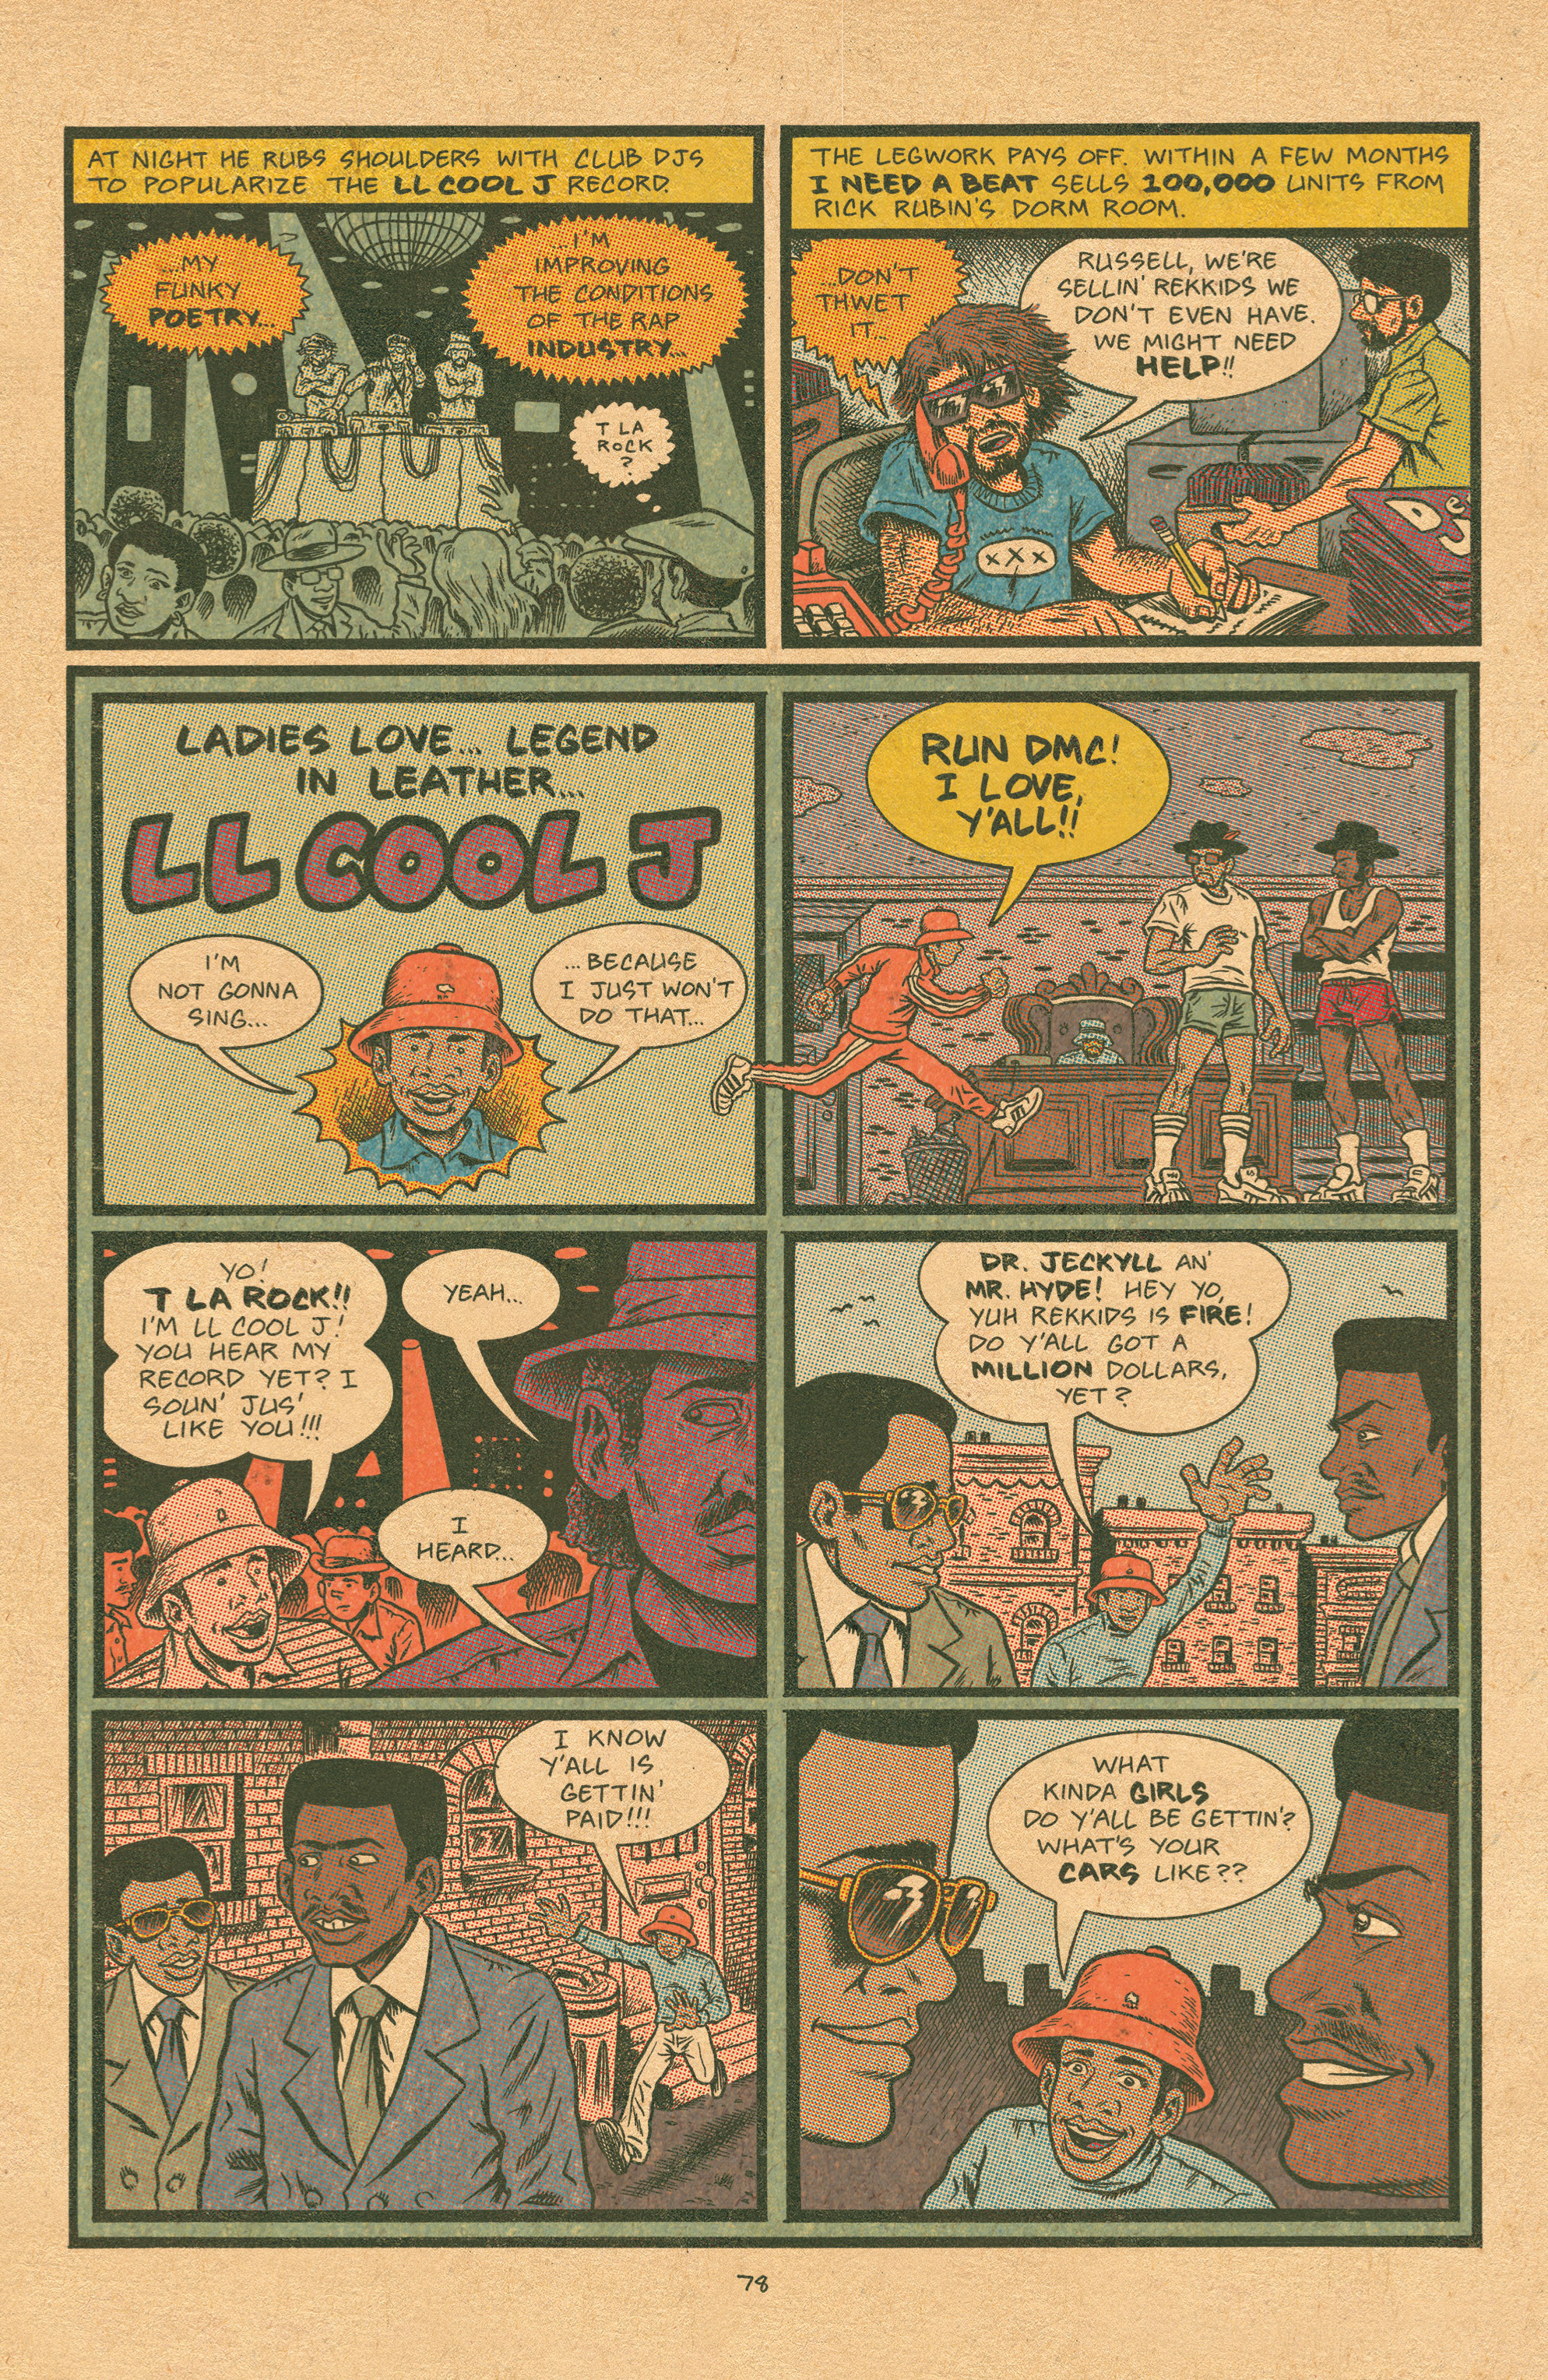 Read online Free Comic Book Day 2015 comic -  Issue # Hip Hop Family Tree Three-in-One - Featuring Cosplayers - 28